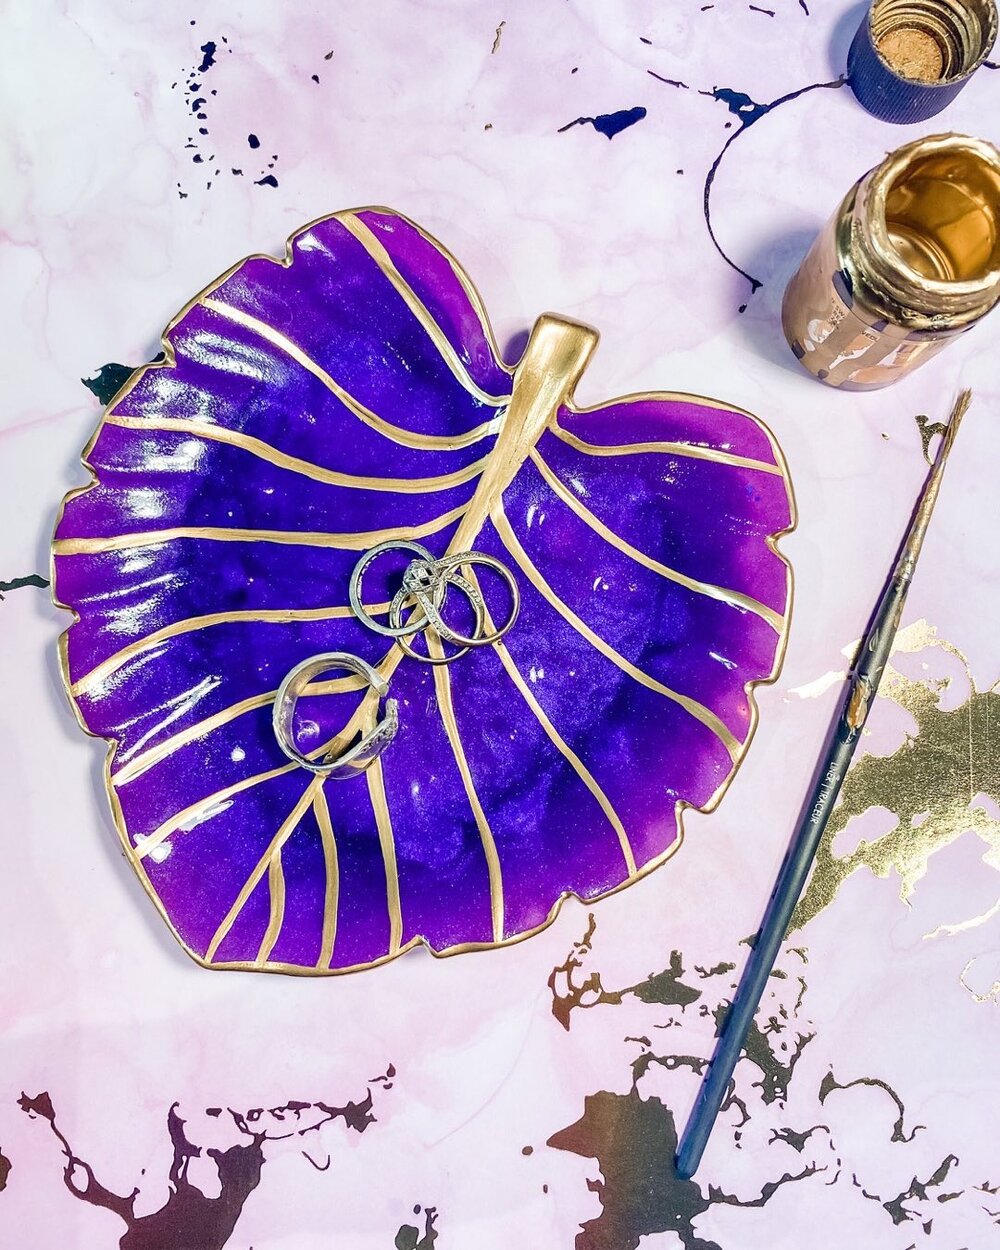 Haven&rsquo;t made one of these in a while, but this color is so gorgeous! One of the first custom dishes I made, in purple amethyst by @meyspring #resindemolding #tropicaldesign #purplelover #princepurple #coloredleaves